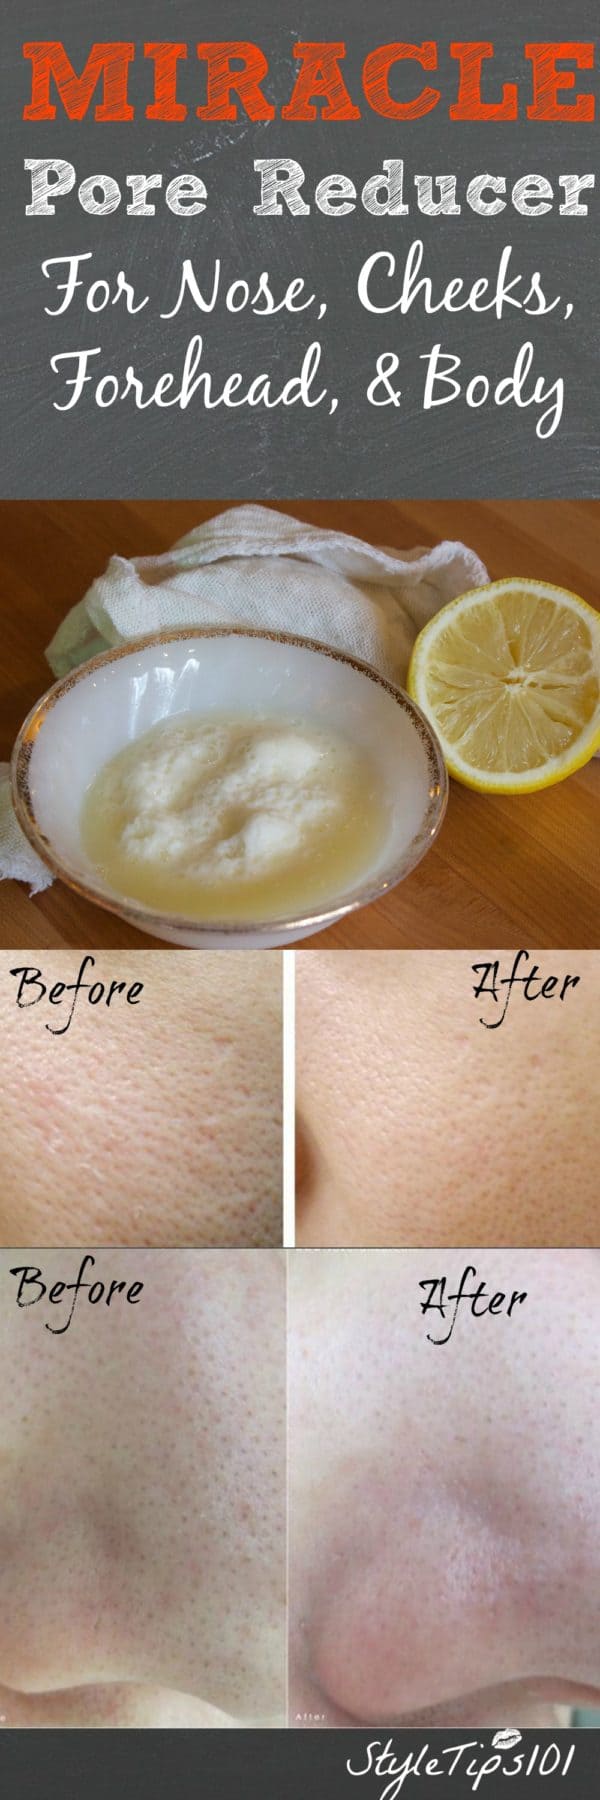 How To Naturally Solve Beauty Problems Using Homemade Recipes With Baking Soda